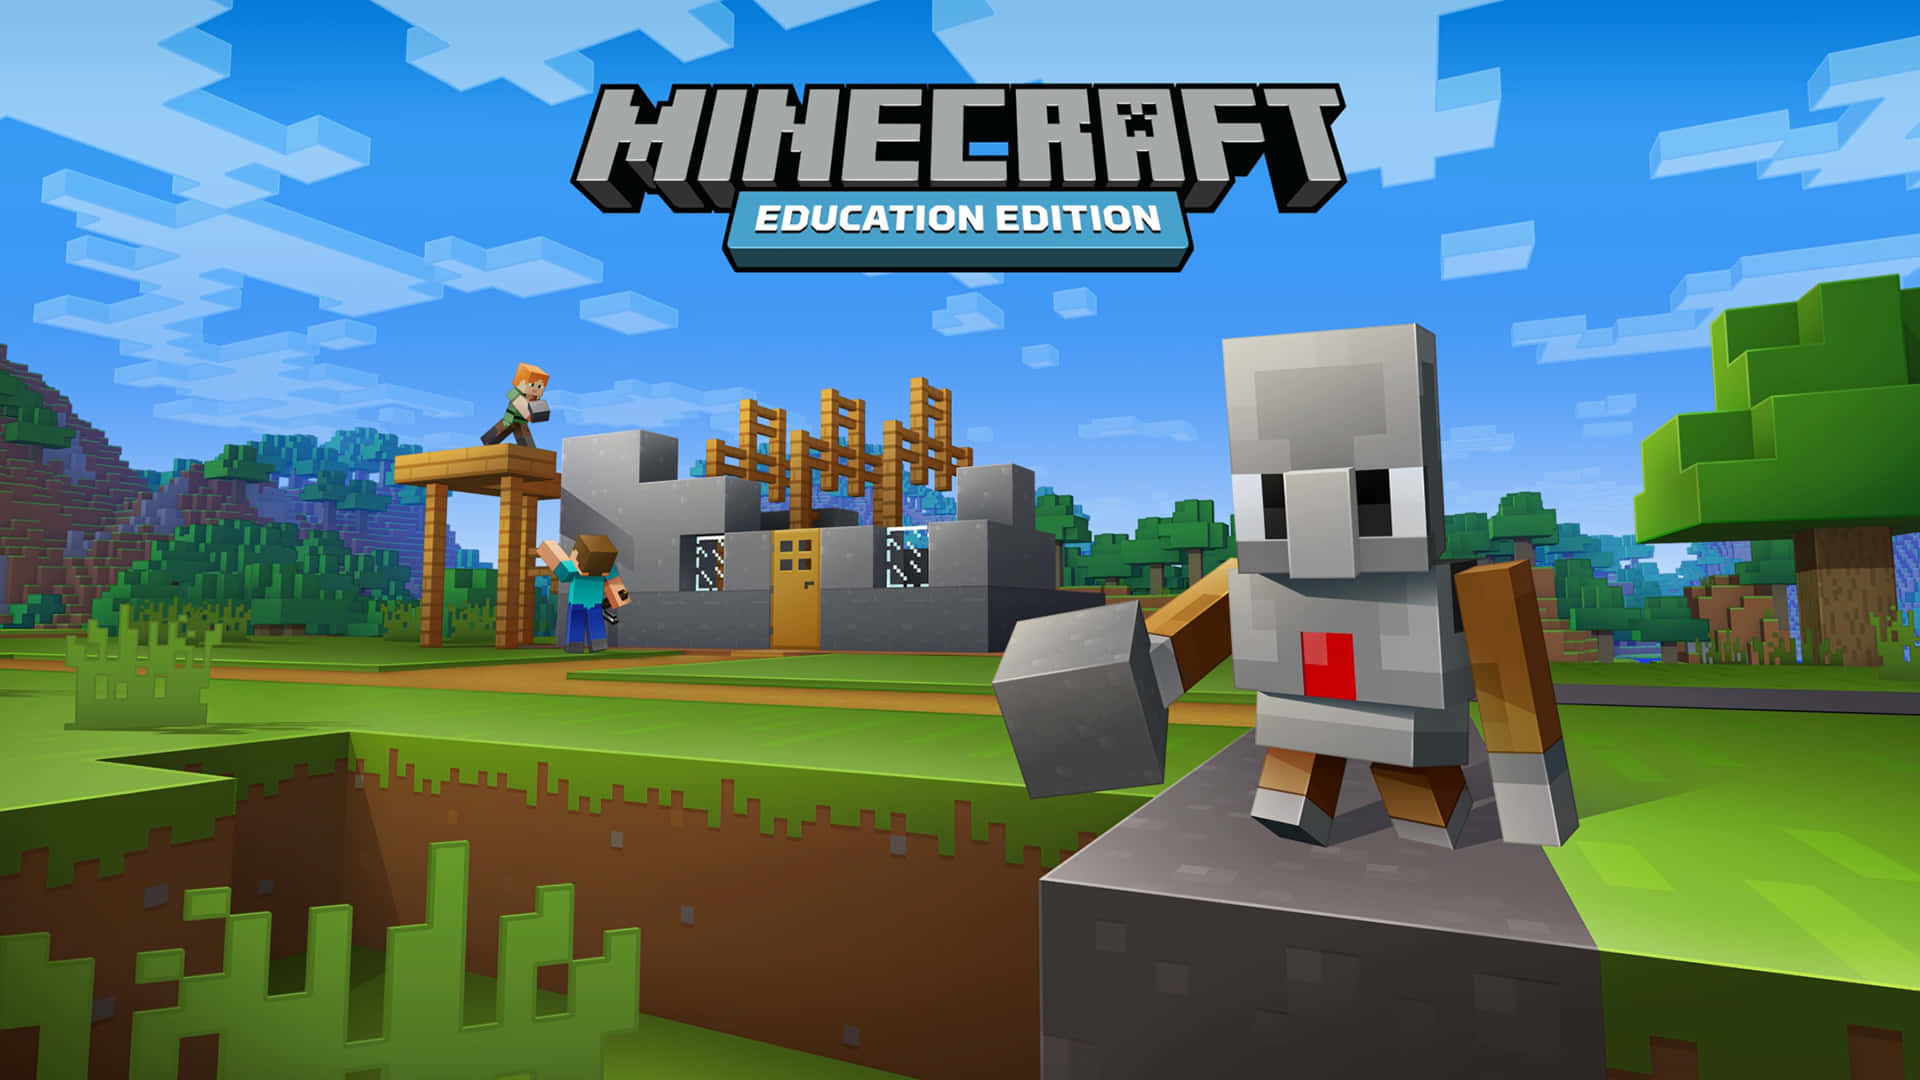 Students exploring a virtual world together in Minecraft Education Edition Wallpaper